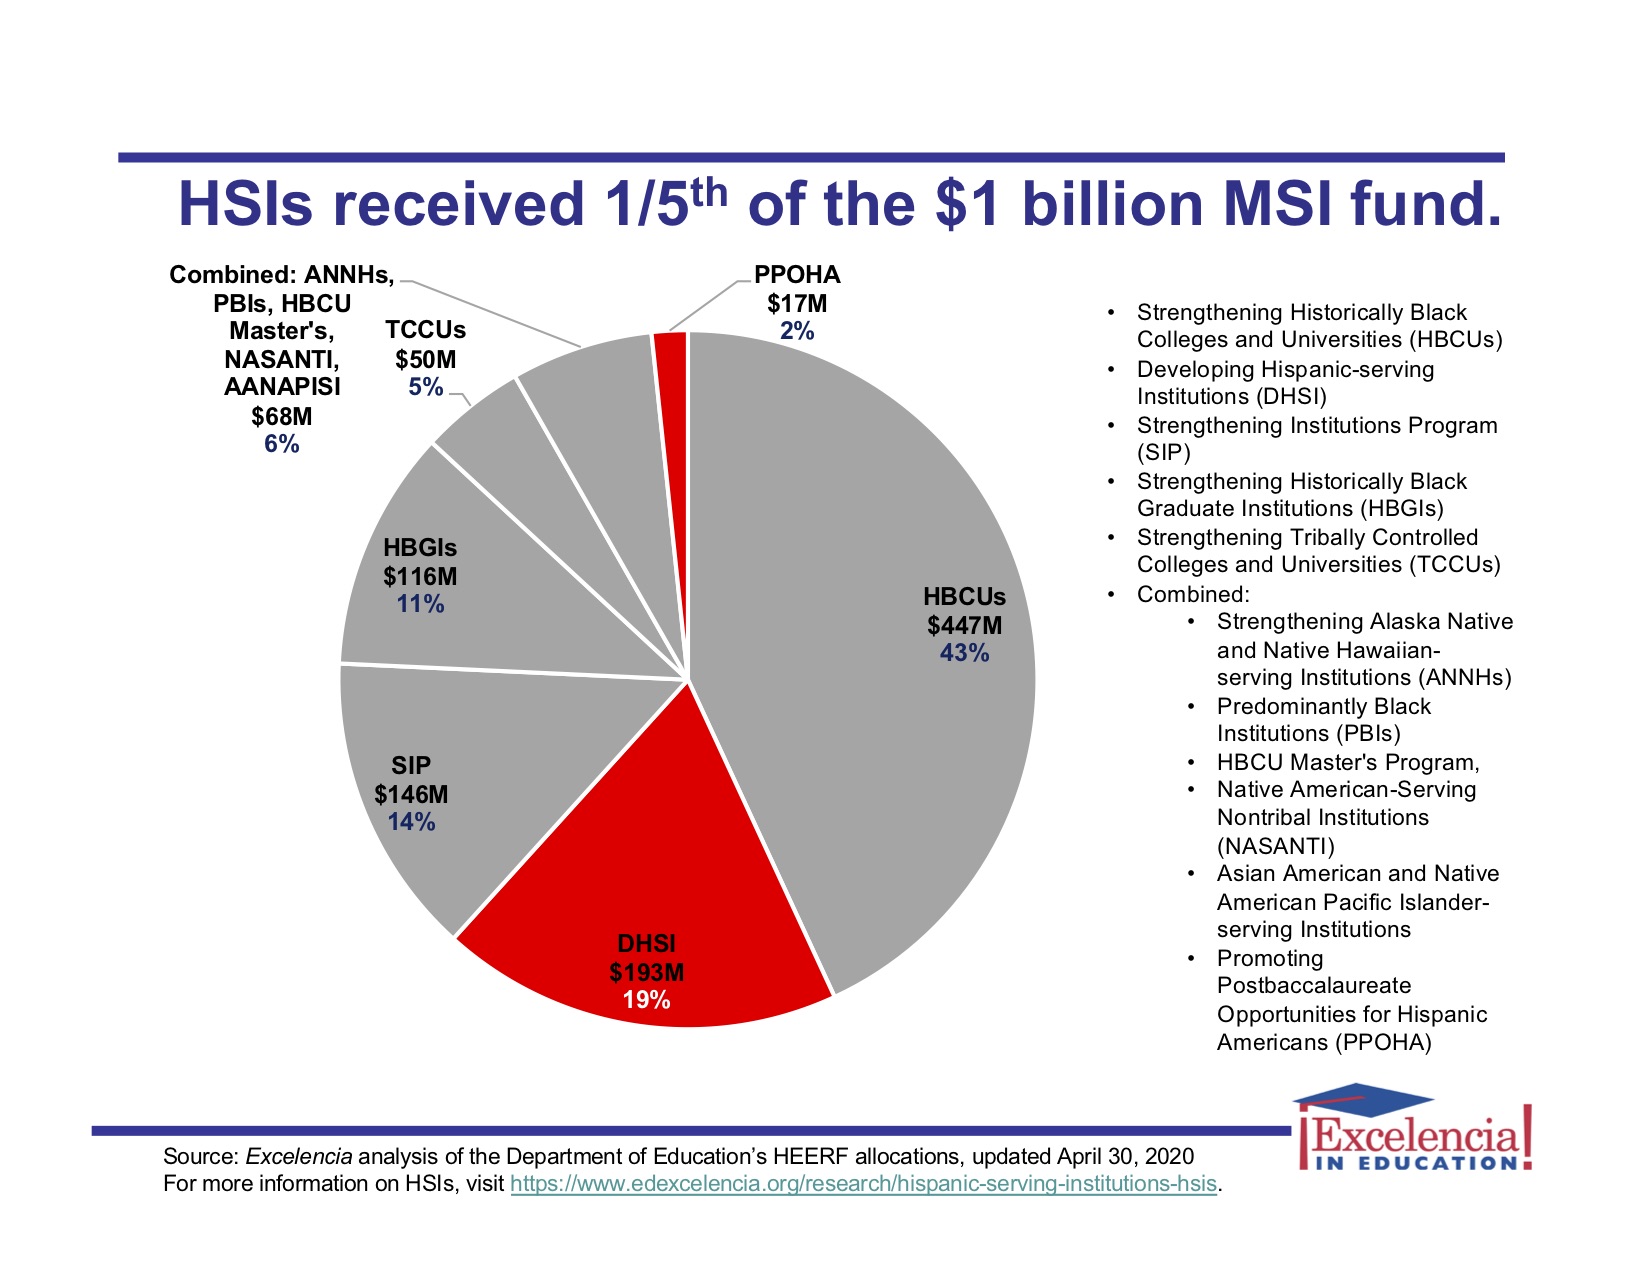 Infographic - Hispanic-Serving Institutions (HSIs) receive portion of MSI fund